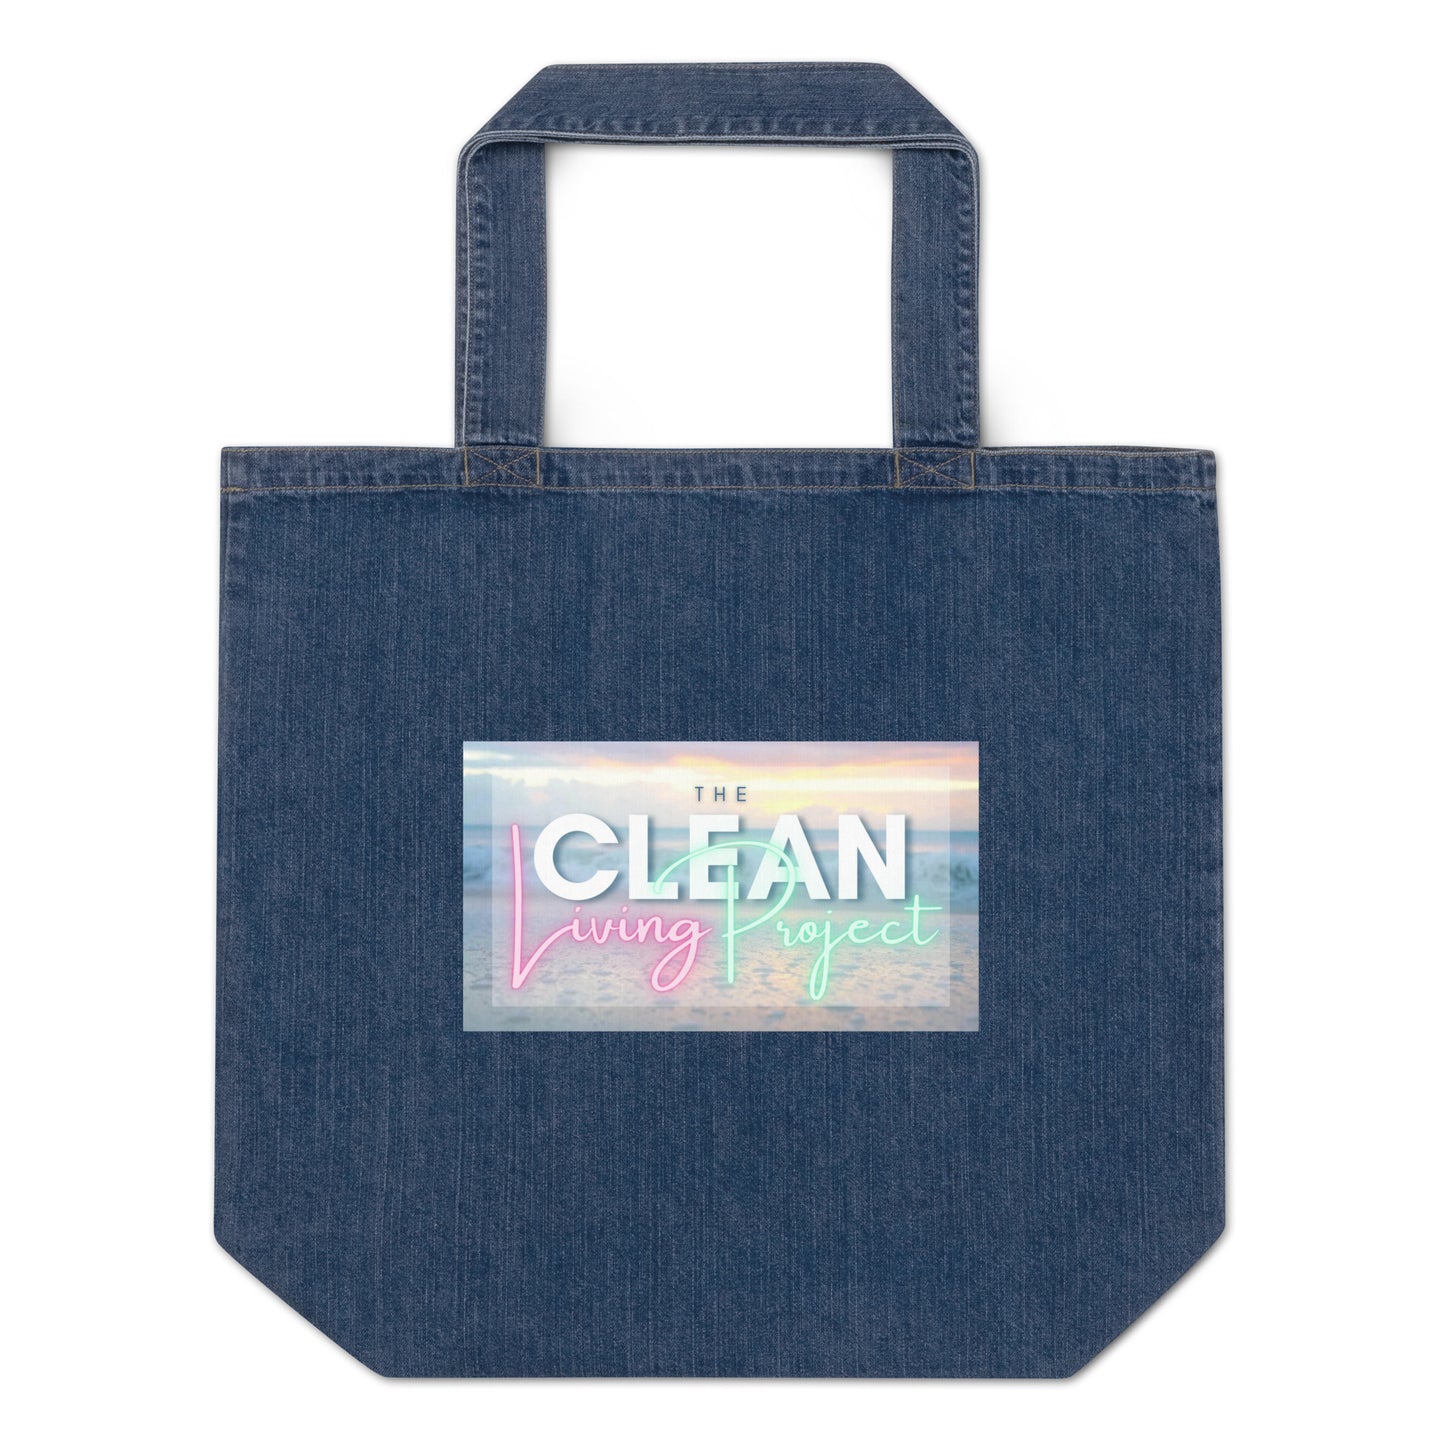 The Clean Living Project Organic Denim Tote Bag (waves)